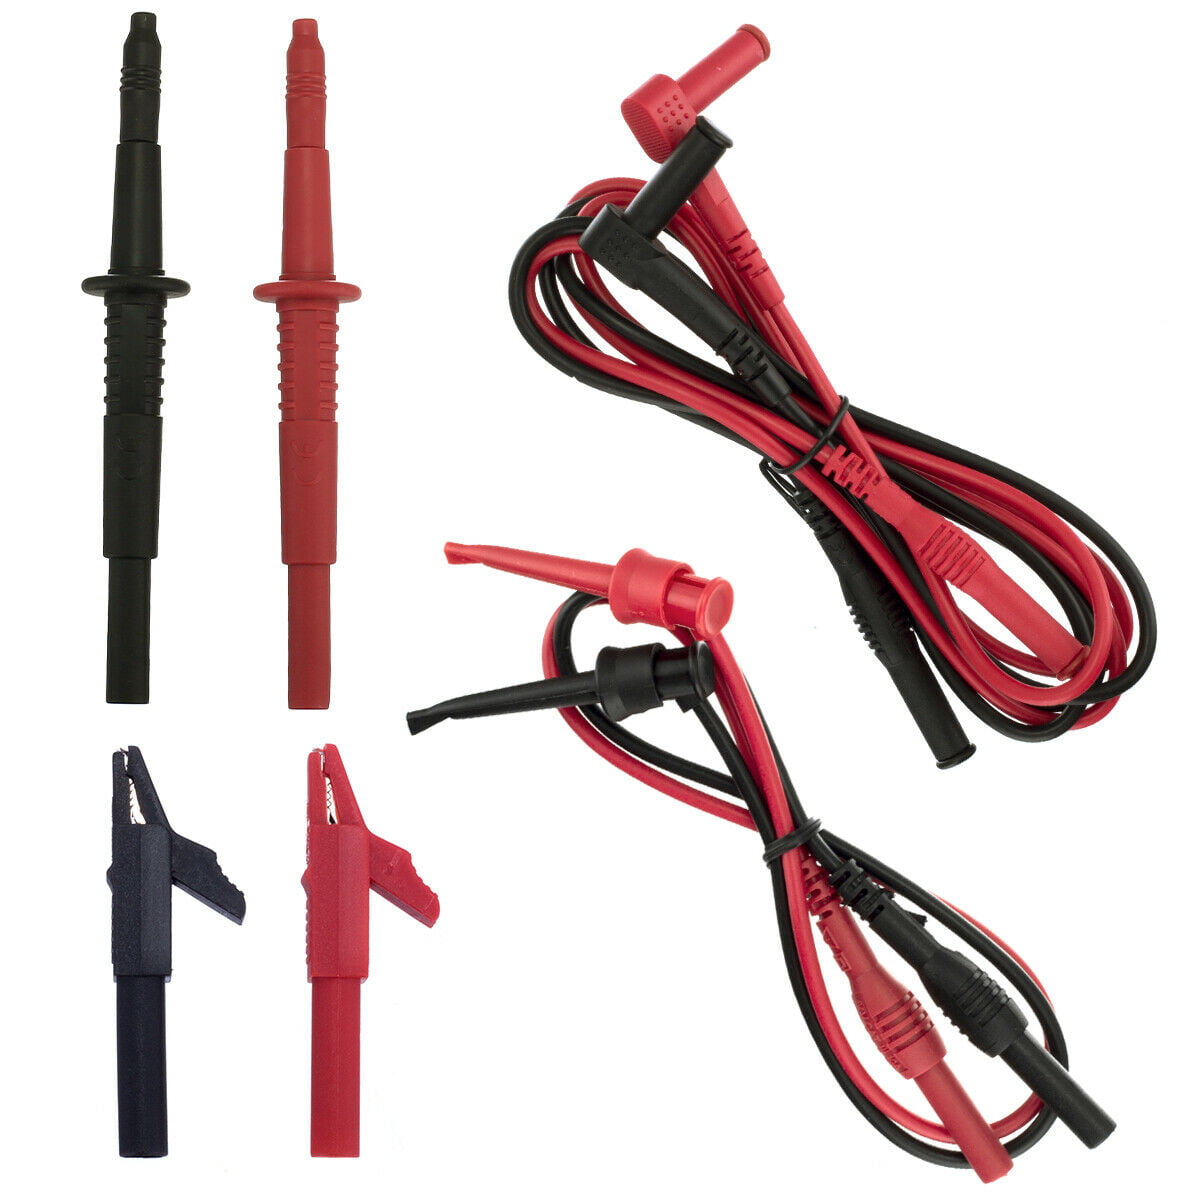 WGGE Wg-012 Electronic Test Lead Kit With Insulation Alligator Clips 42 Inch PVC for sale online 